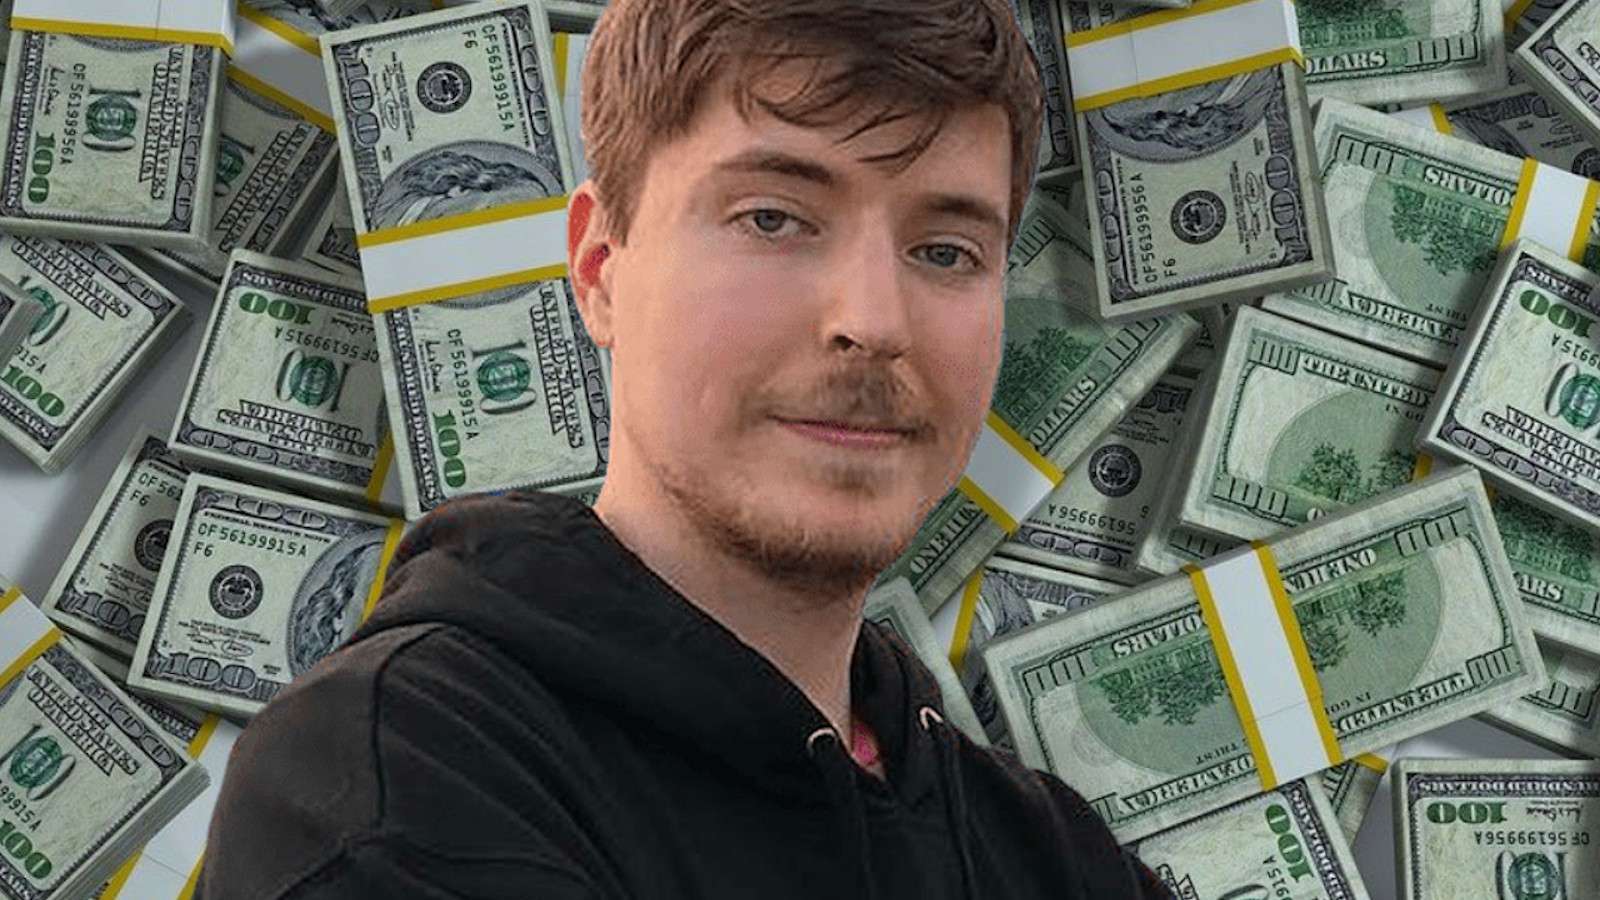 MrBeast in front of wads of cash